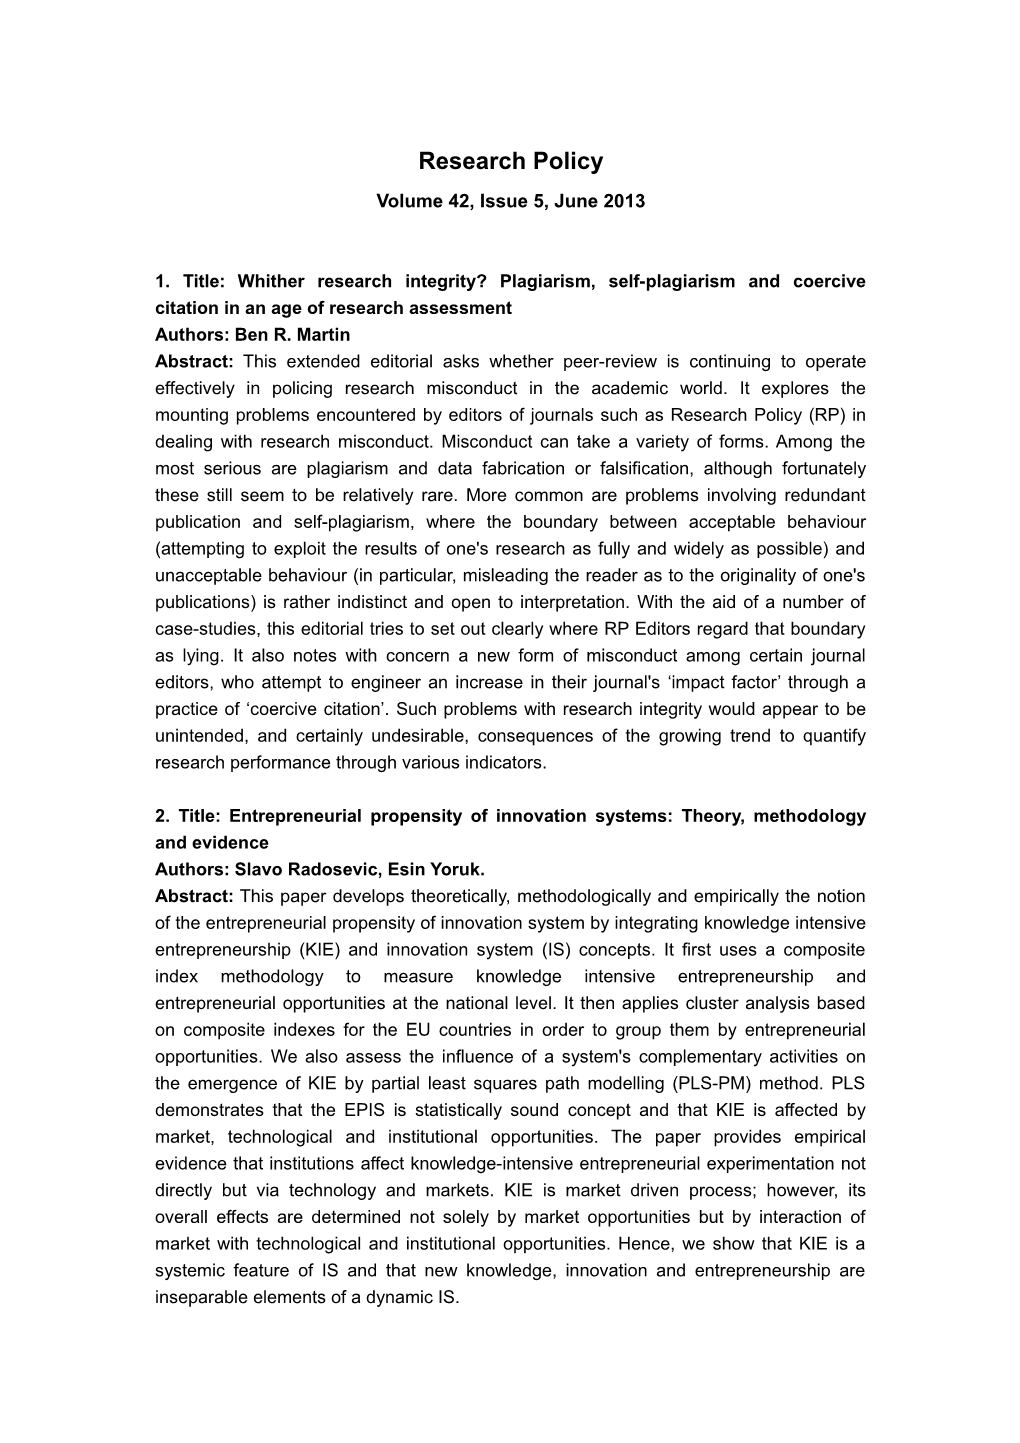 1. Title:Whither Research Integrity? Plagiarism, Self-Plagiarism and Coercive Citation